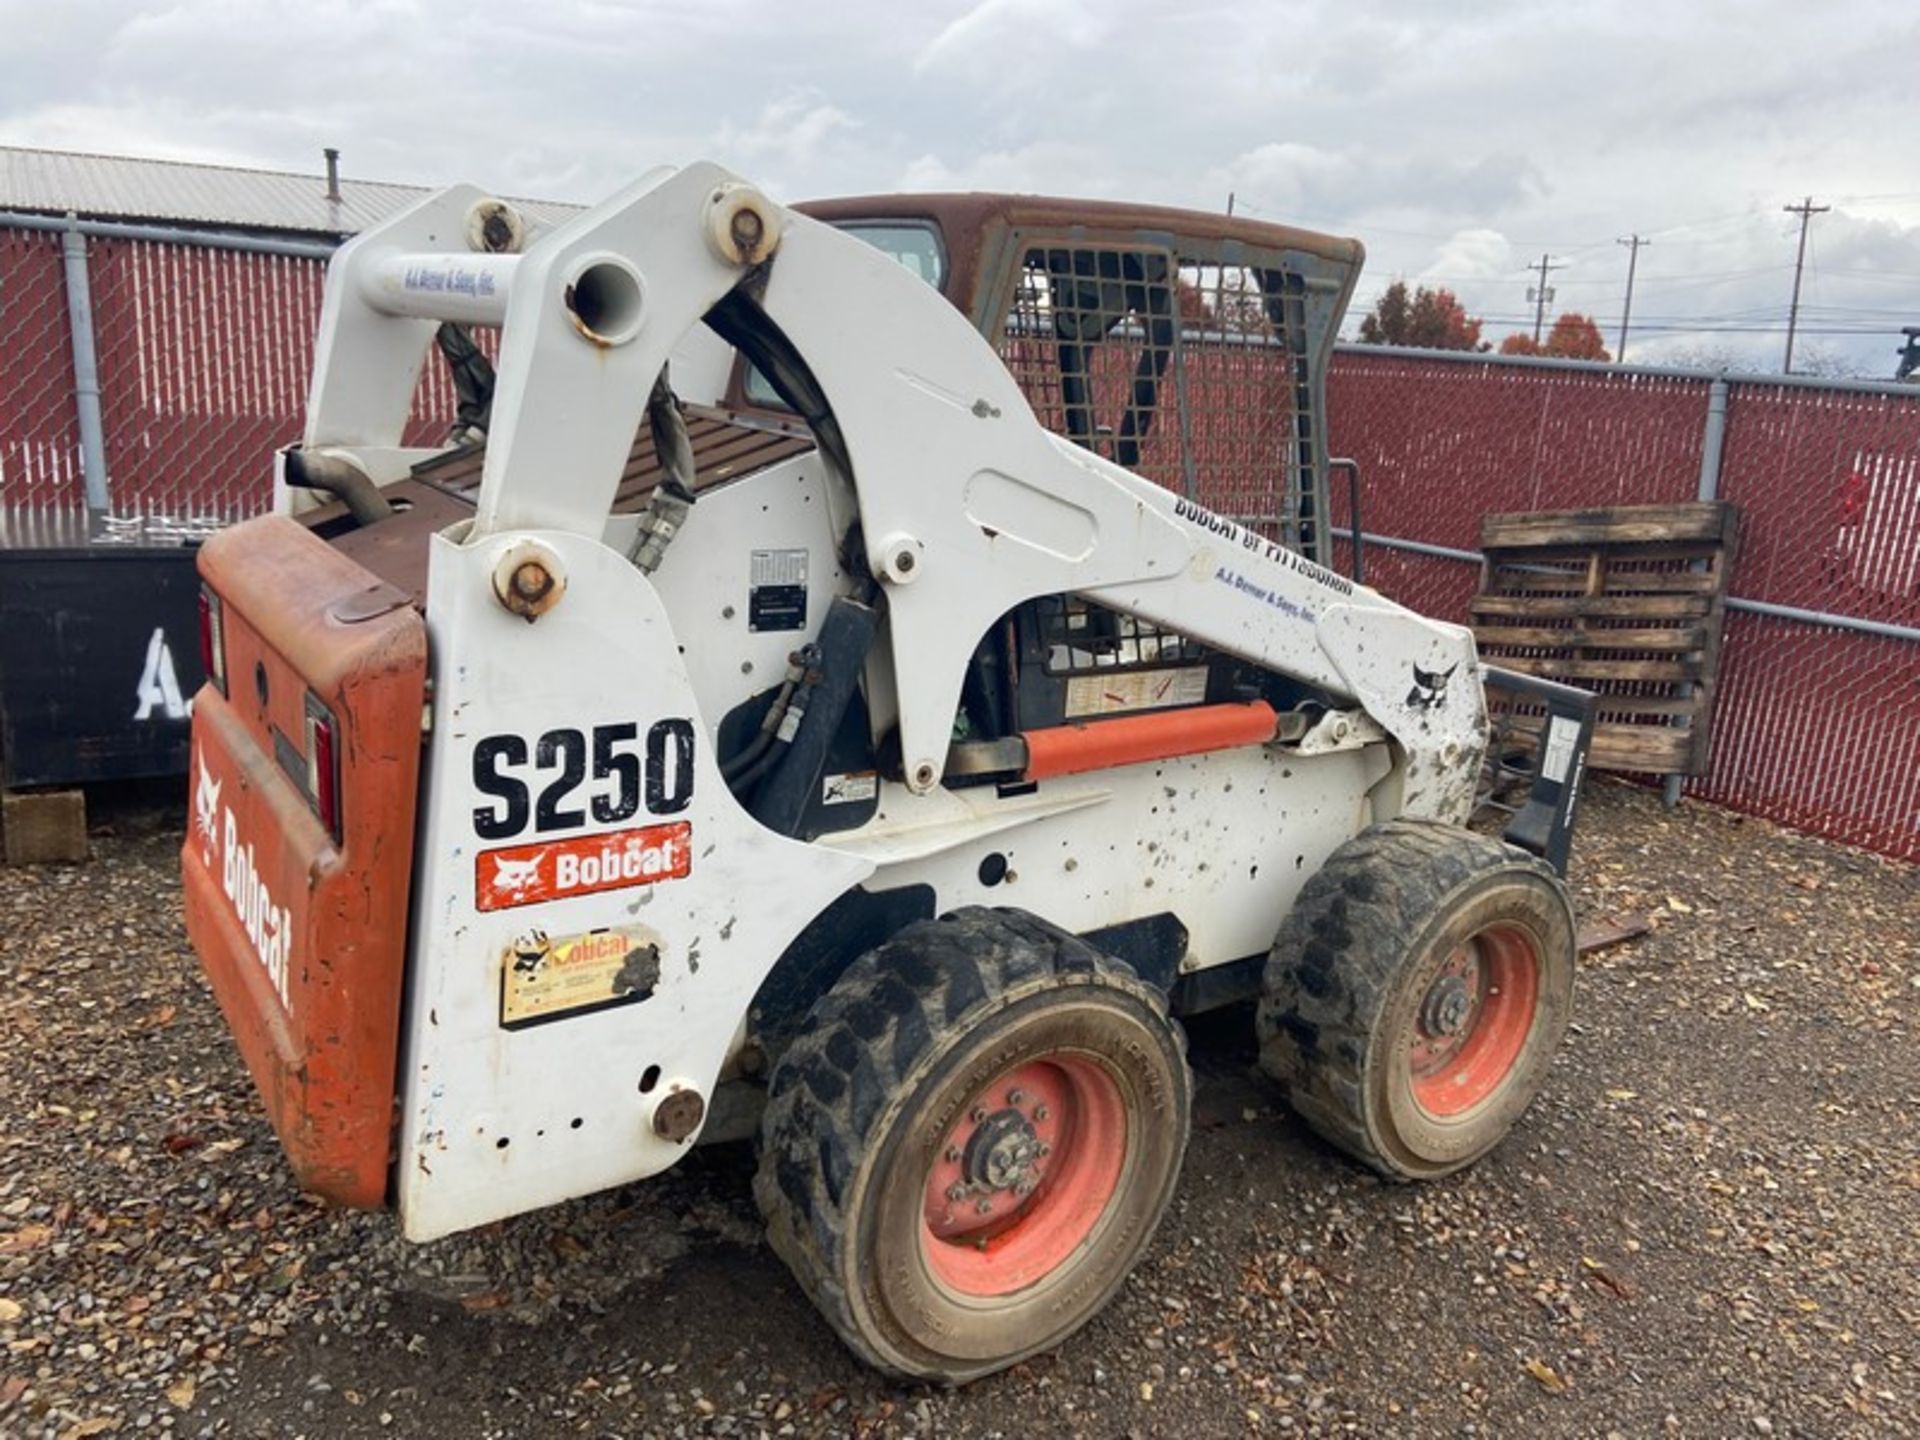 2010 Bobcat S250 Compact Skid Steer, VIN#: A5GM36985, with Fork Attachment (NOTE: DELAYED REMOVAL - Bild 7 aus 12